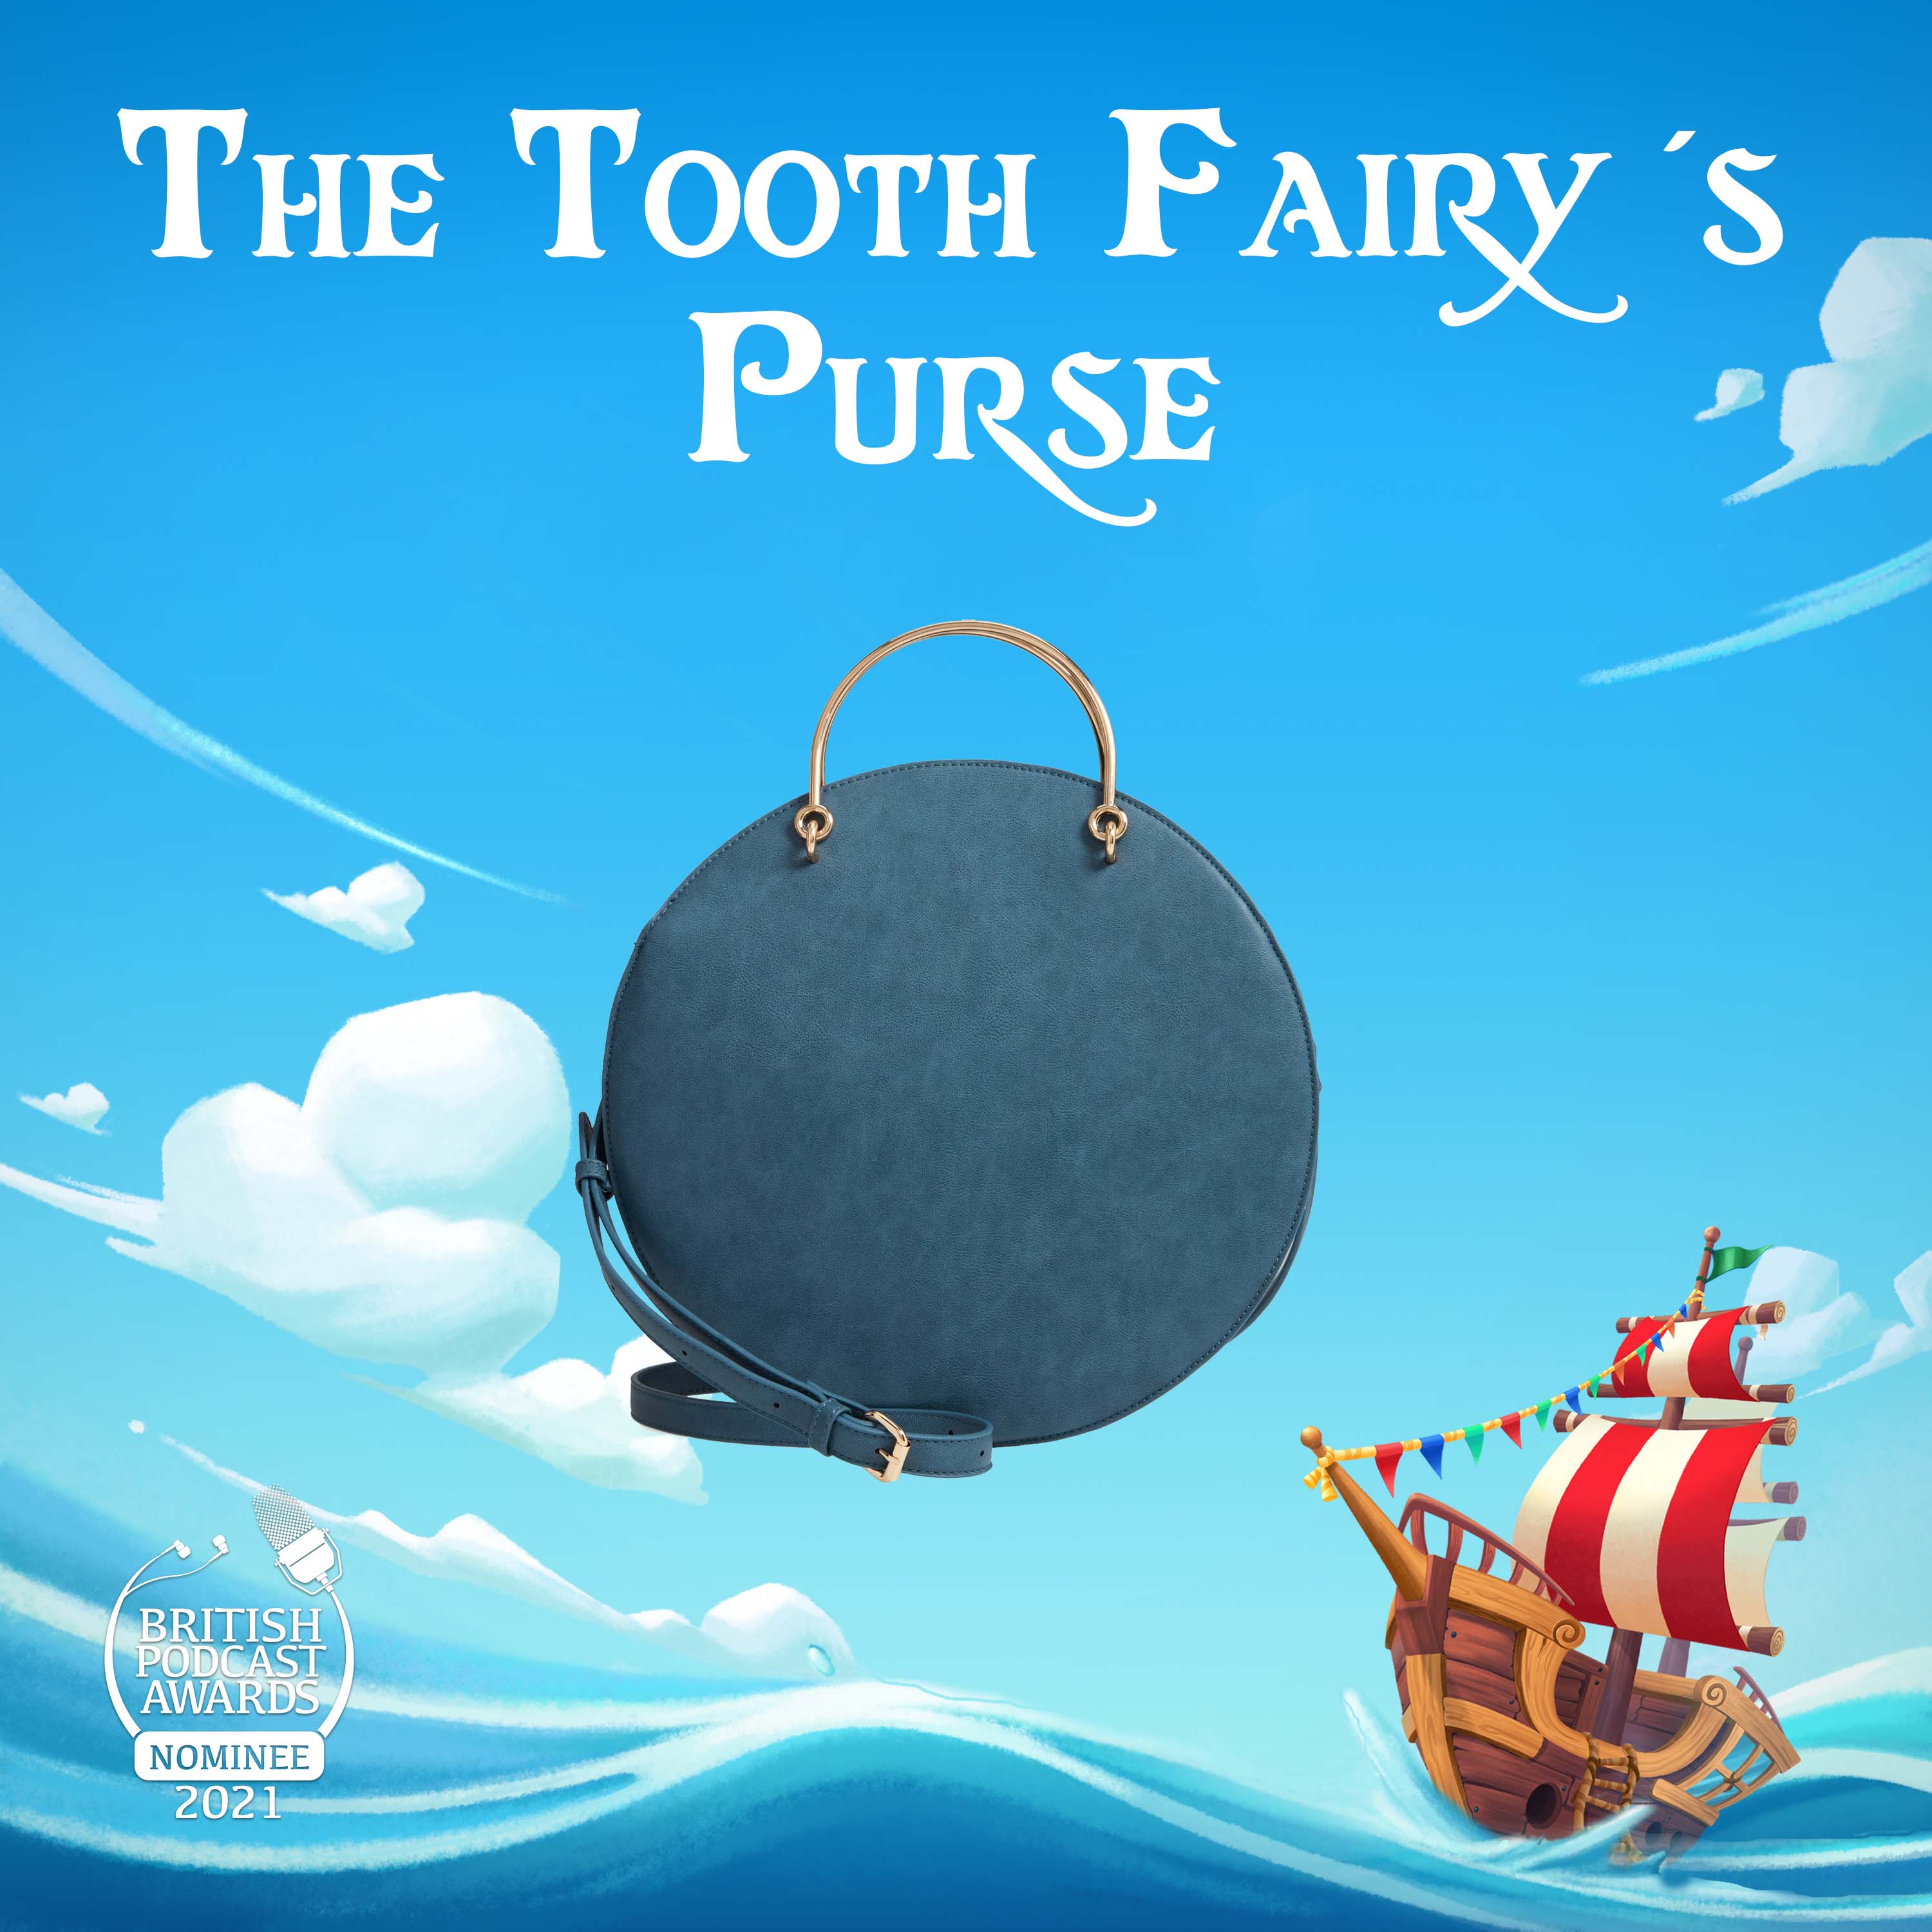 The Tooth Fairy's Purse